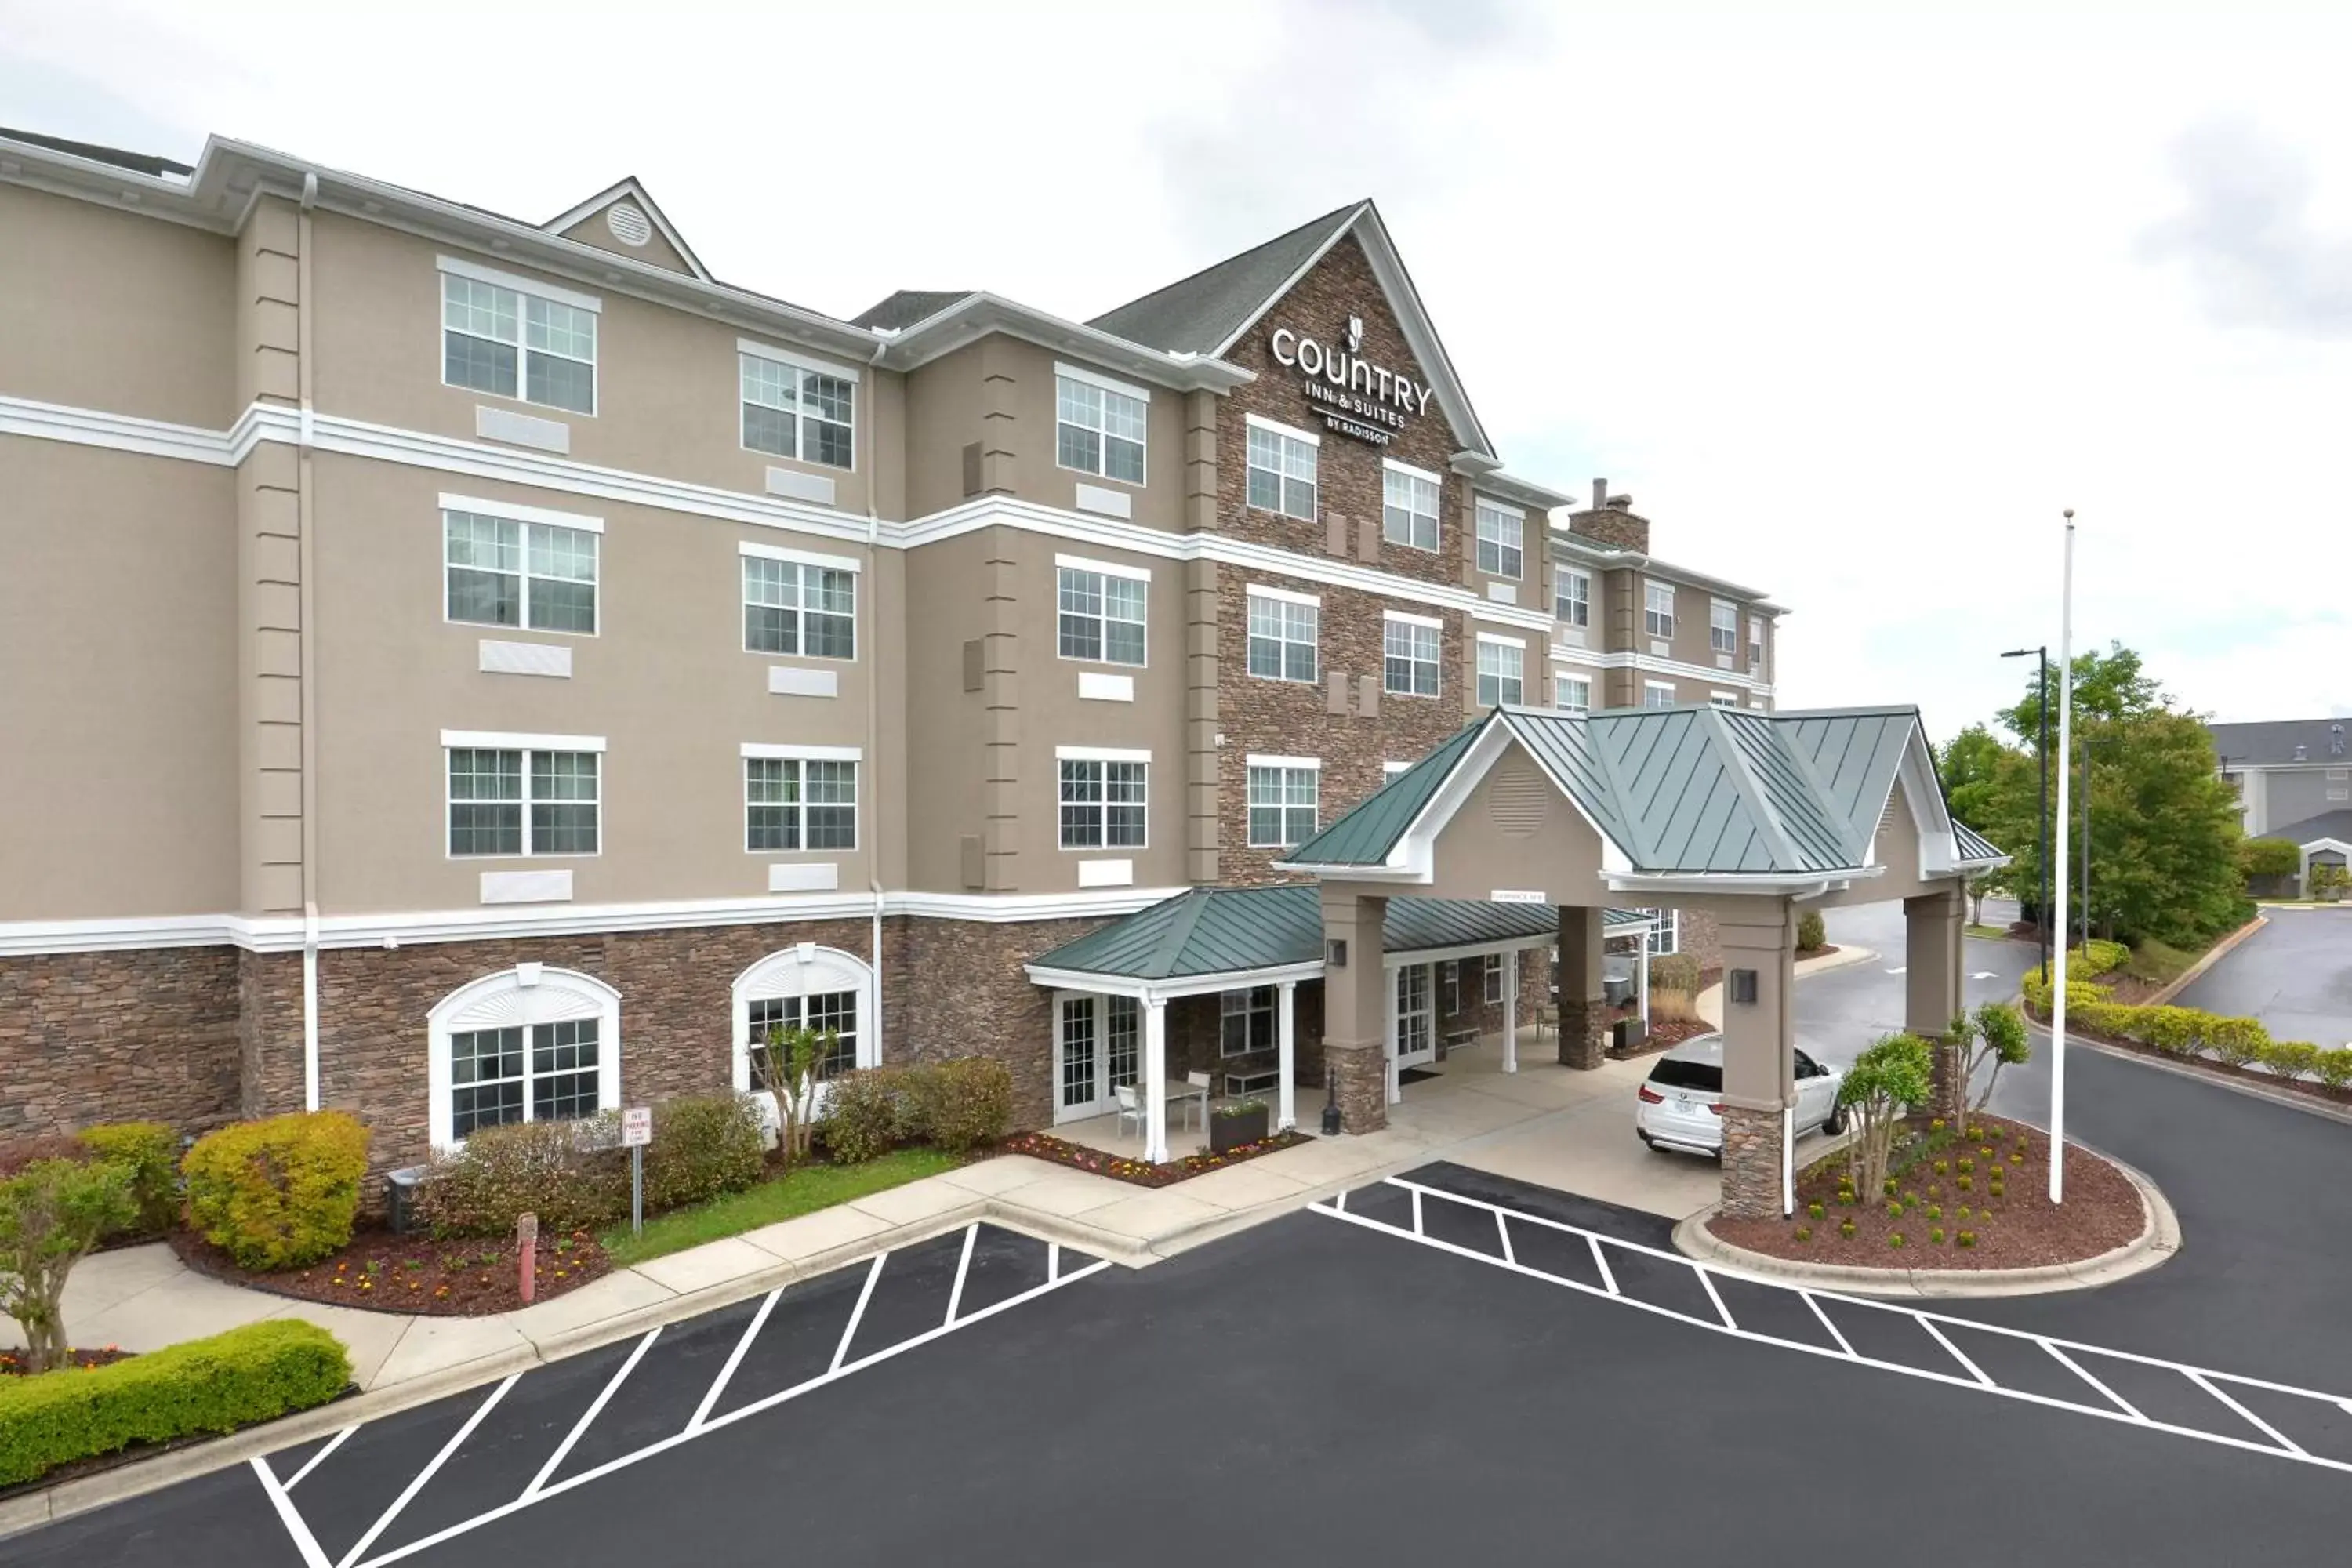 Property Building in Country Inn & Suites by Radisson Asheville West